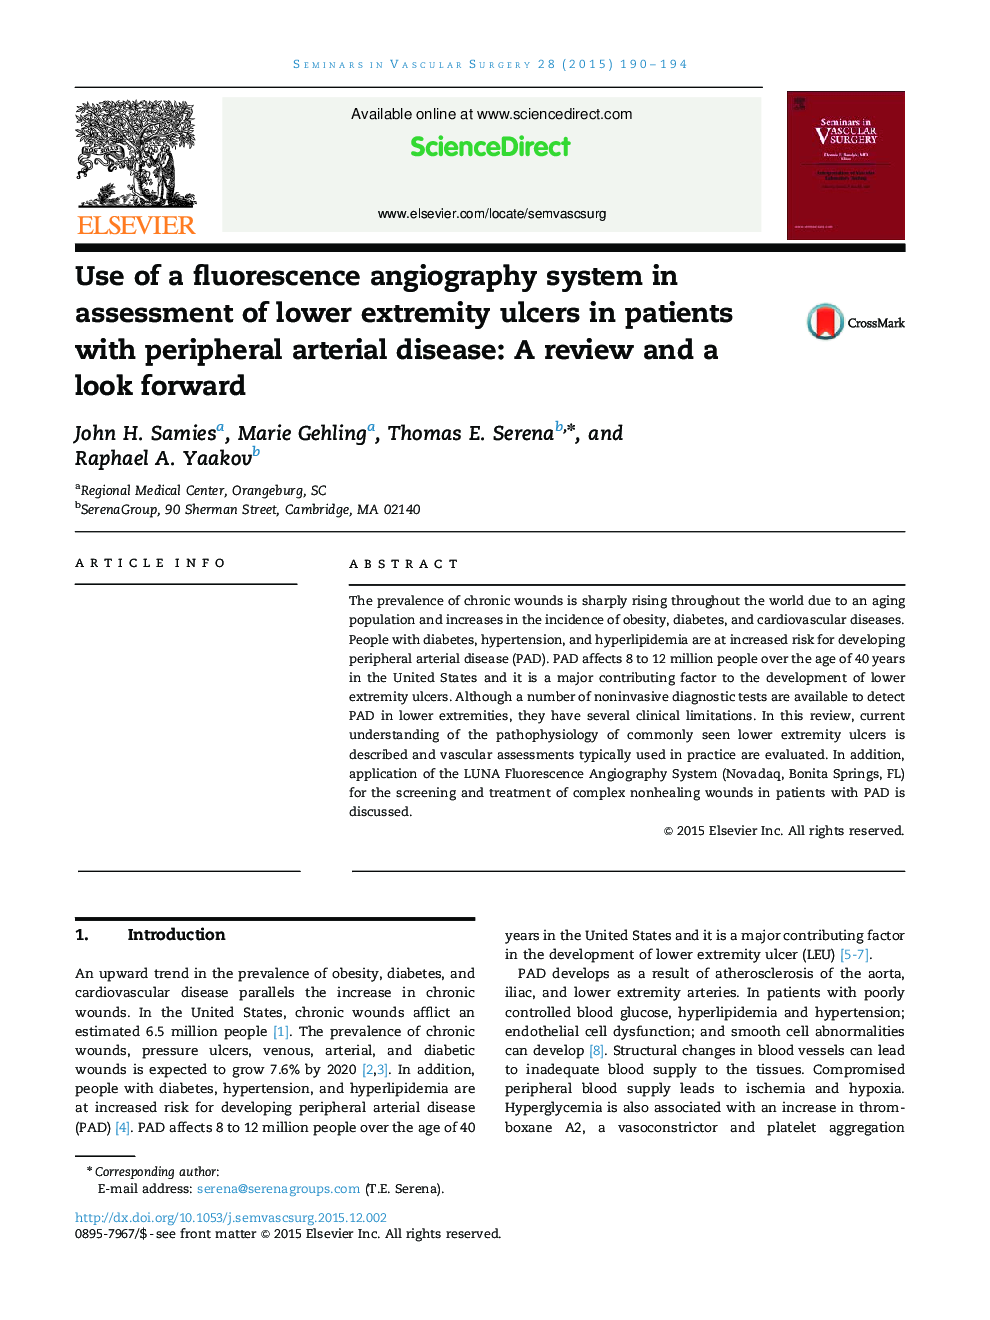 Use of a fluorescence angiography system in assessment of lower extremity ulcers in patients with peripheral arterial disease: A review and a look forward